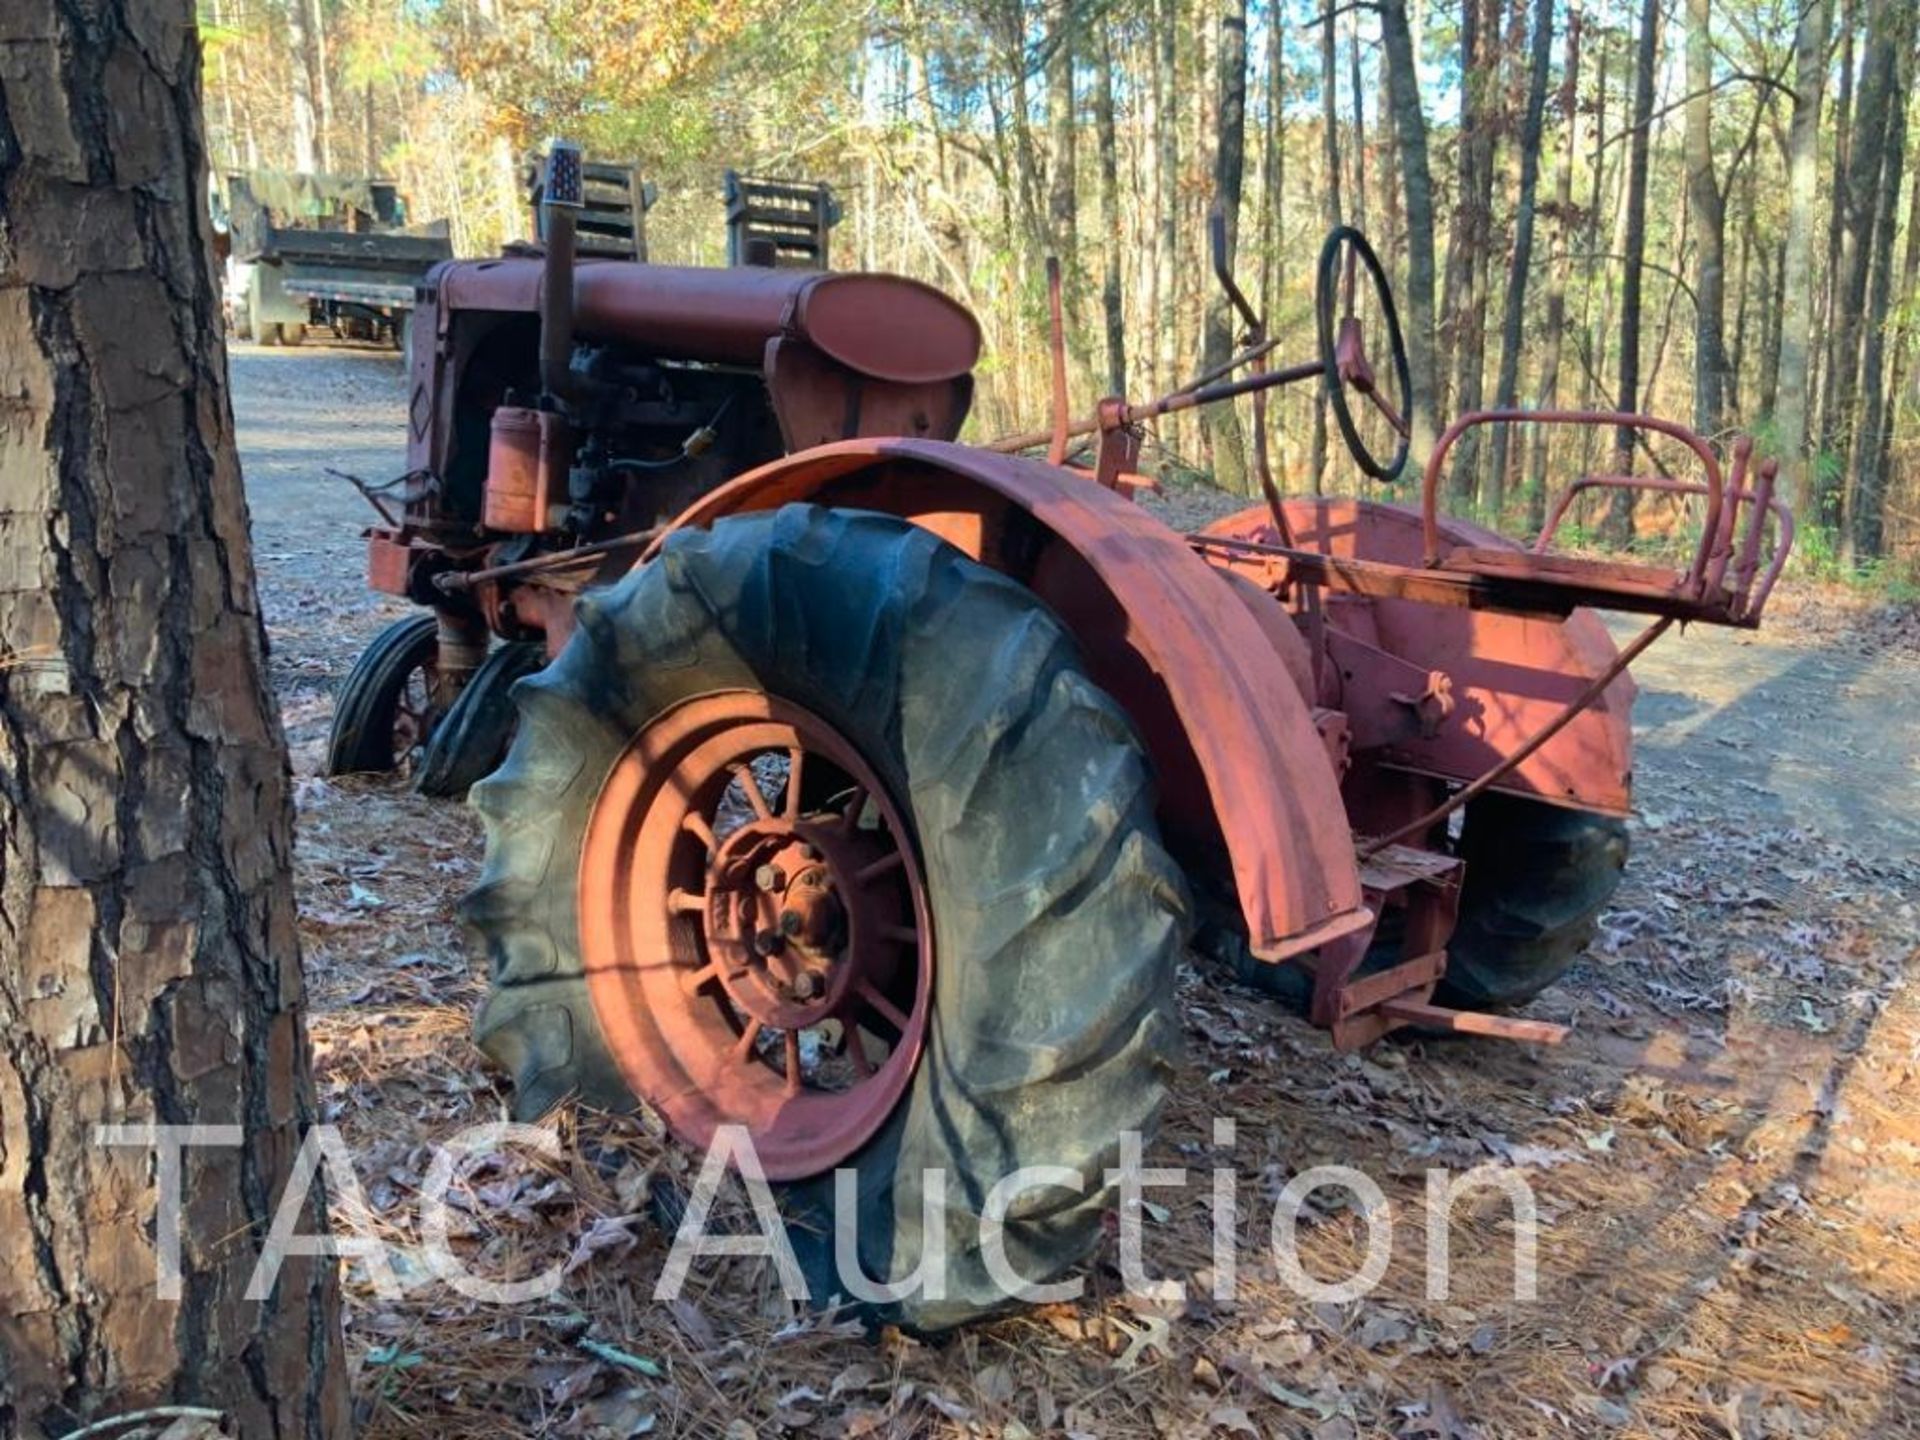 Allis Chalmers Tri Cycle Antique Farm Tractor - Image 2 of 16